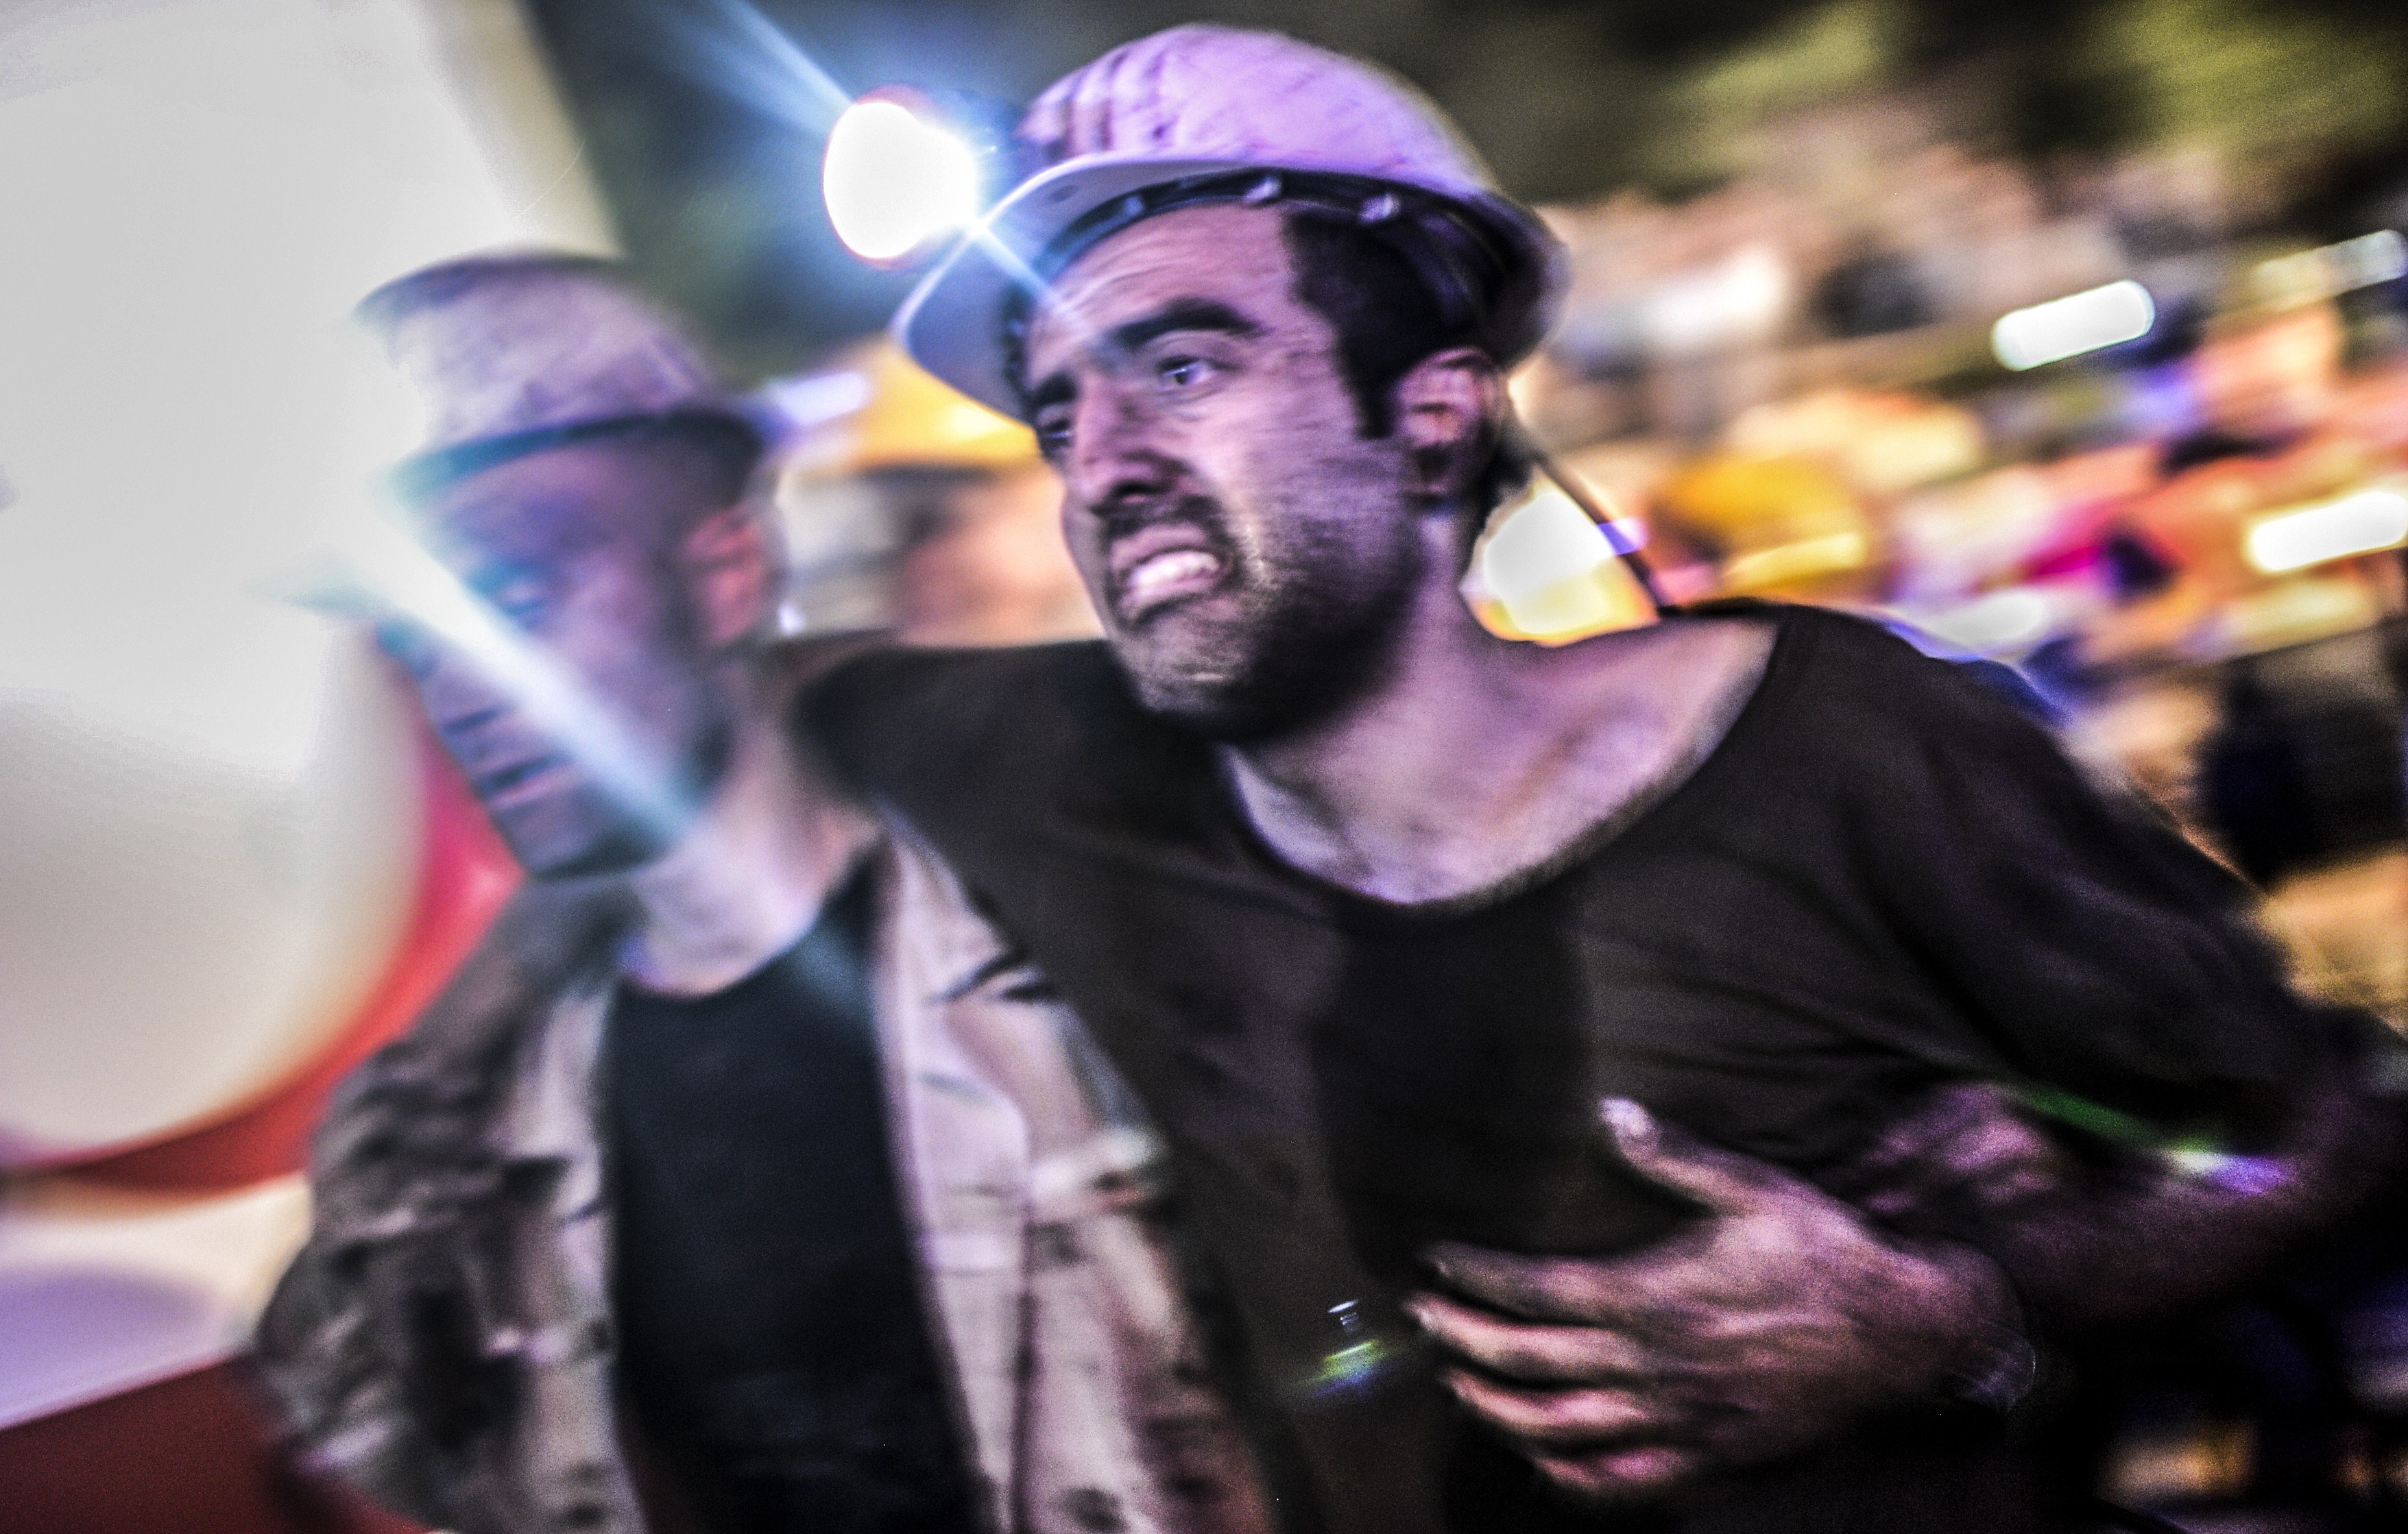 An injured miner came out carried by rescuers, on May 13, 2014 after an explosion in a coal mine in Manisa.